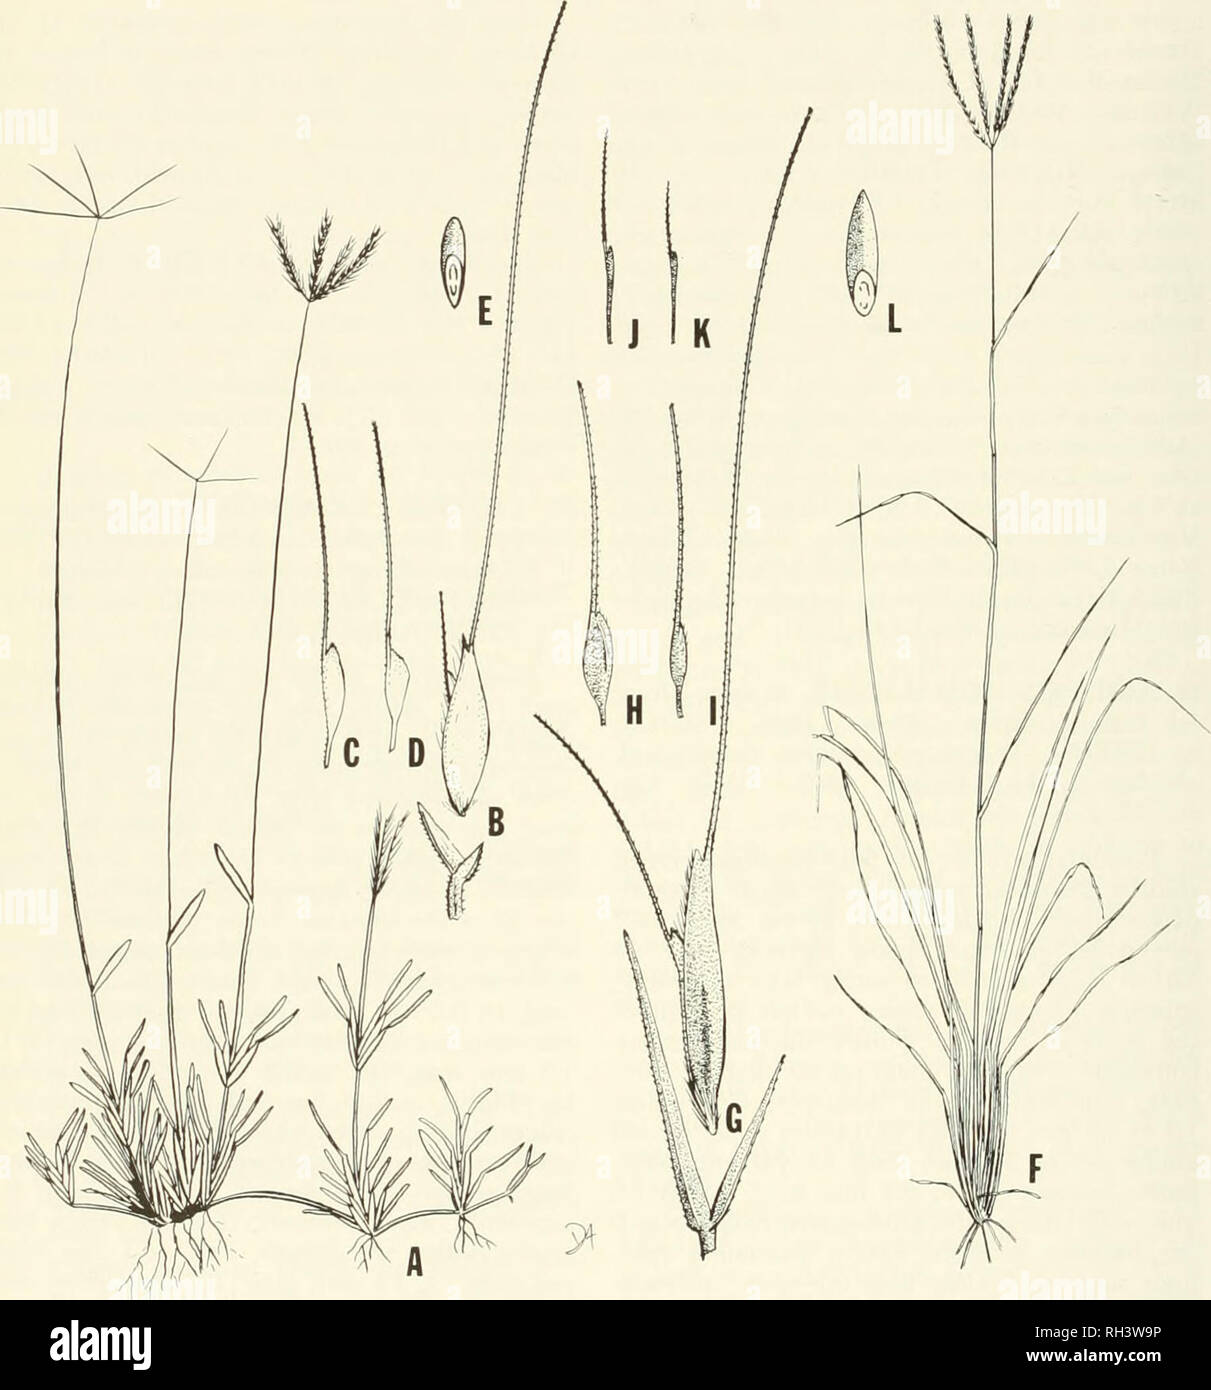 . Brigham Young University science bulletin. Biology -- Periodicals. no Bbigham Young University Science Bulletin. Fig. 74. Chlorii dementis and C. somalensis. (A-E) C. dementis. (A) habit, x 1/3; (B) spilcelet, partly dissected, X 10; (CD) sterile florets, showing variation, x 30; (E) caryopsis, x 10. (F-L) C. somalensis. (F) habit, X 1/3; (G) spikelet, partly dissected, x 10; (H-K) sterile florets, showing variation, x 10; (L) caryopsis, x 7.5. have similar spikelets but are tufted rather than stoloniferous. No specimens were seen other than the holotype and its isotypes. 48. CHLORIS RADIATA Stock Photo